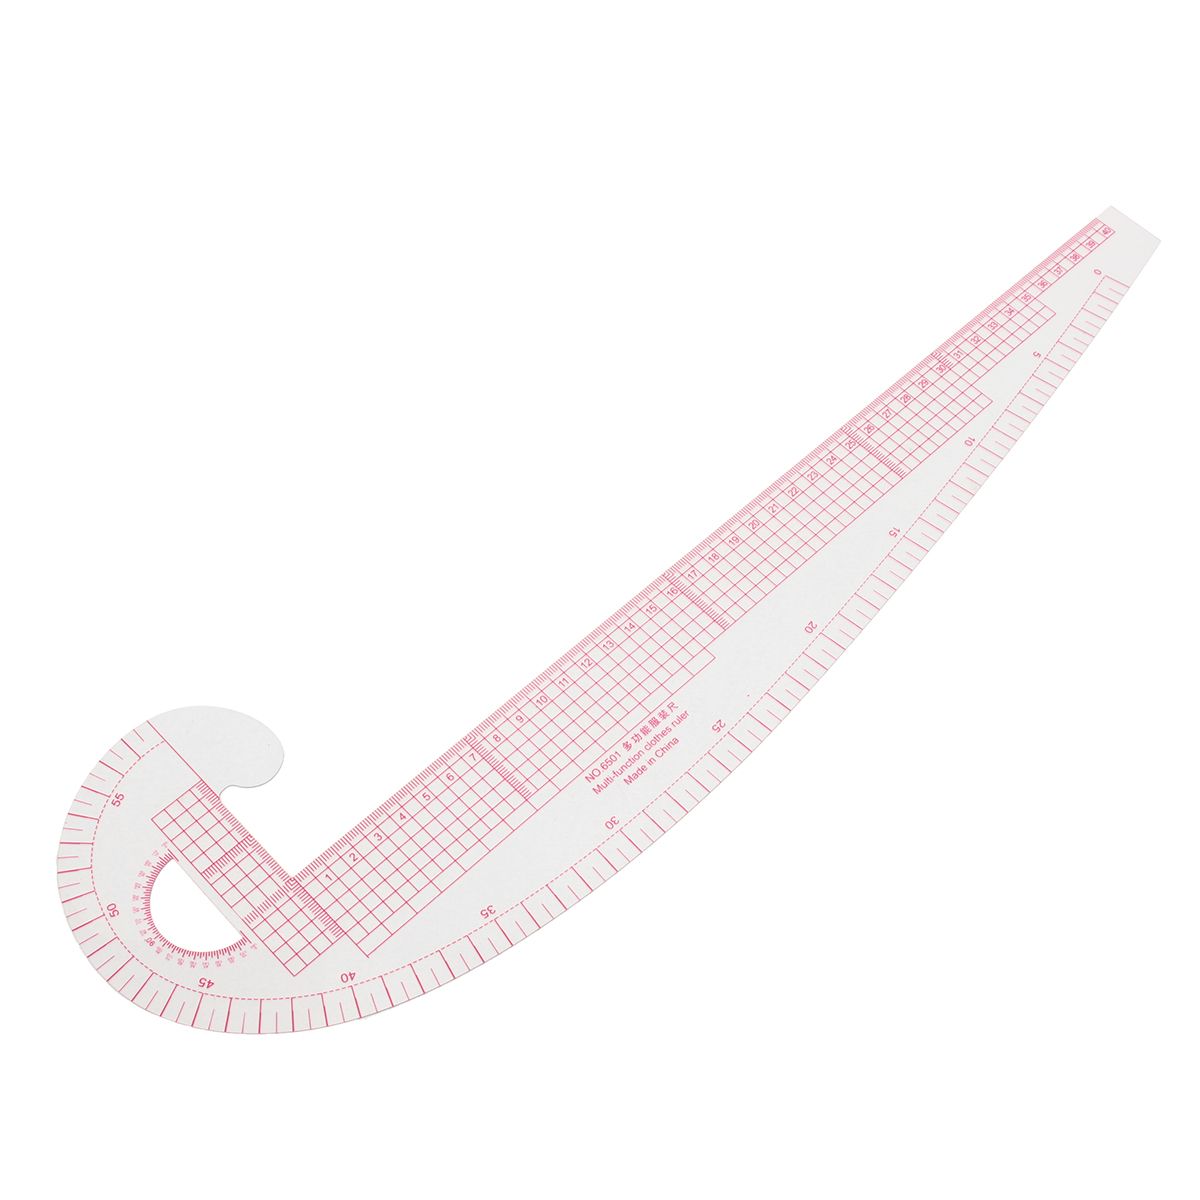 5-Styles-Clear-French-Curve-Metric-Ruler-Measure-Sewing-Dressmaking-Pattern-Design-Tool-Set-1219303